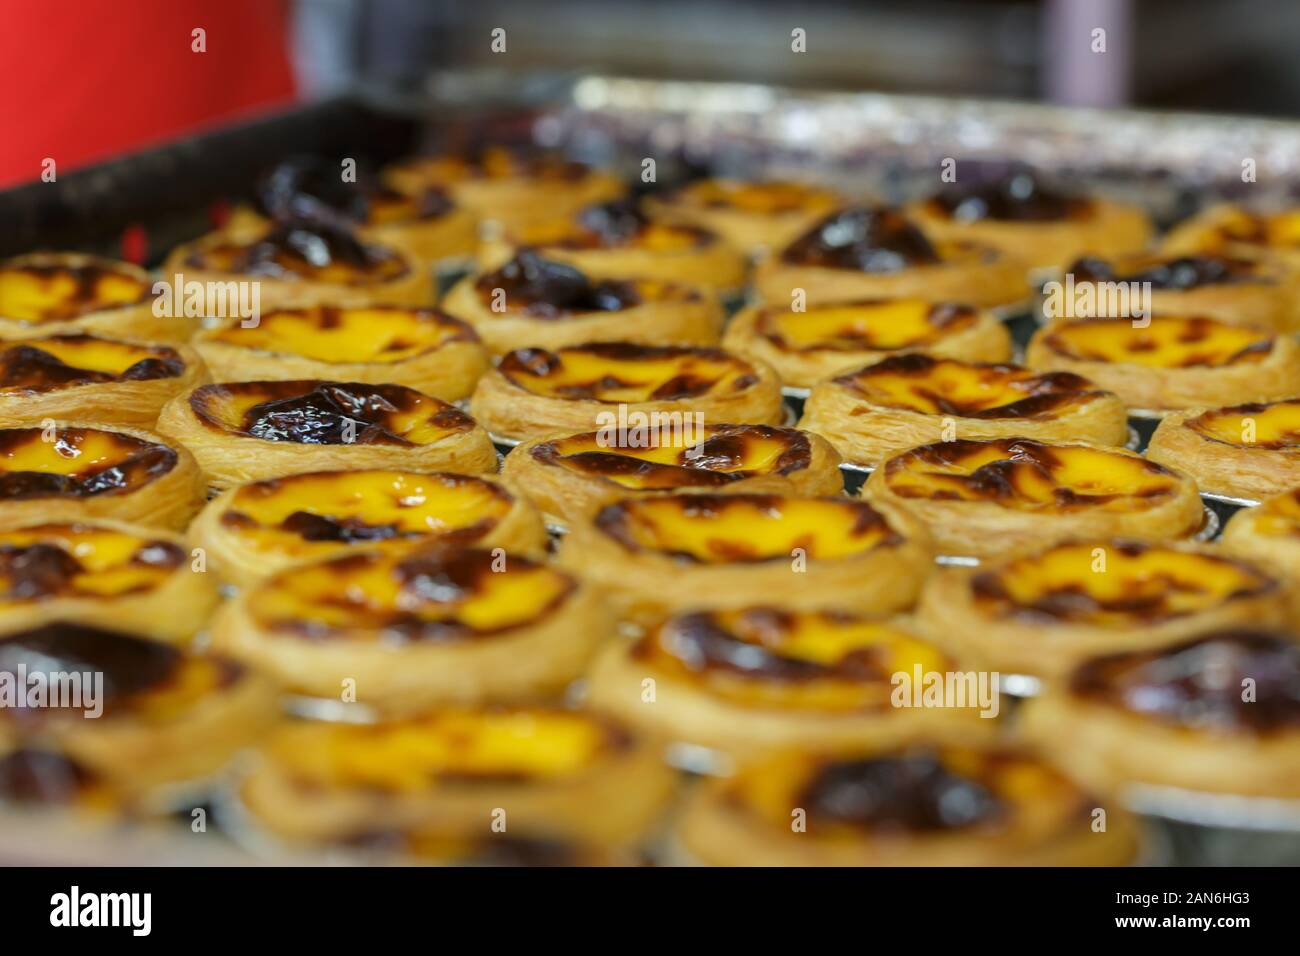 Close-up of a baking tray full with traditional macanese egg tart. Stock Photo